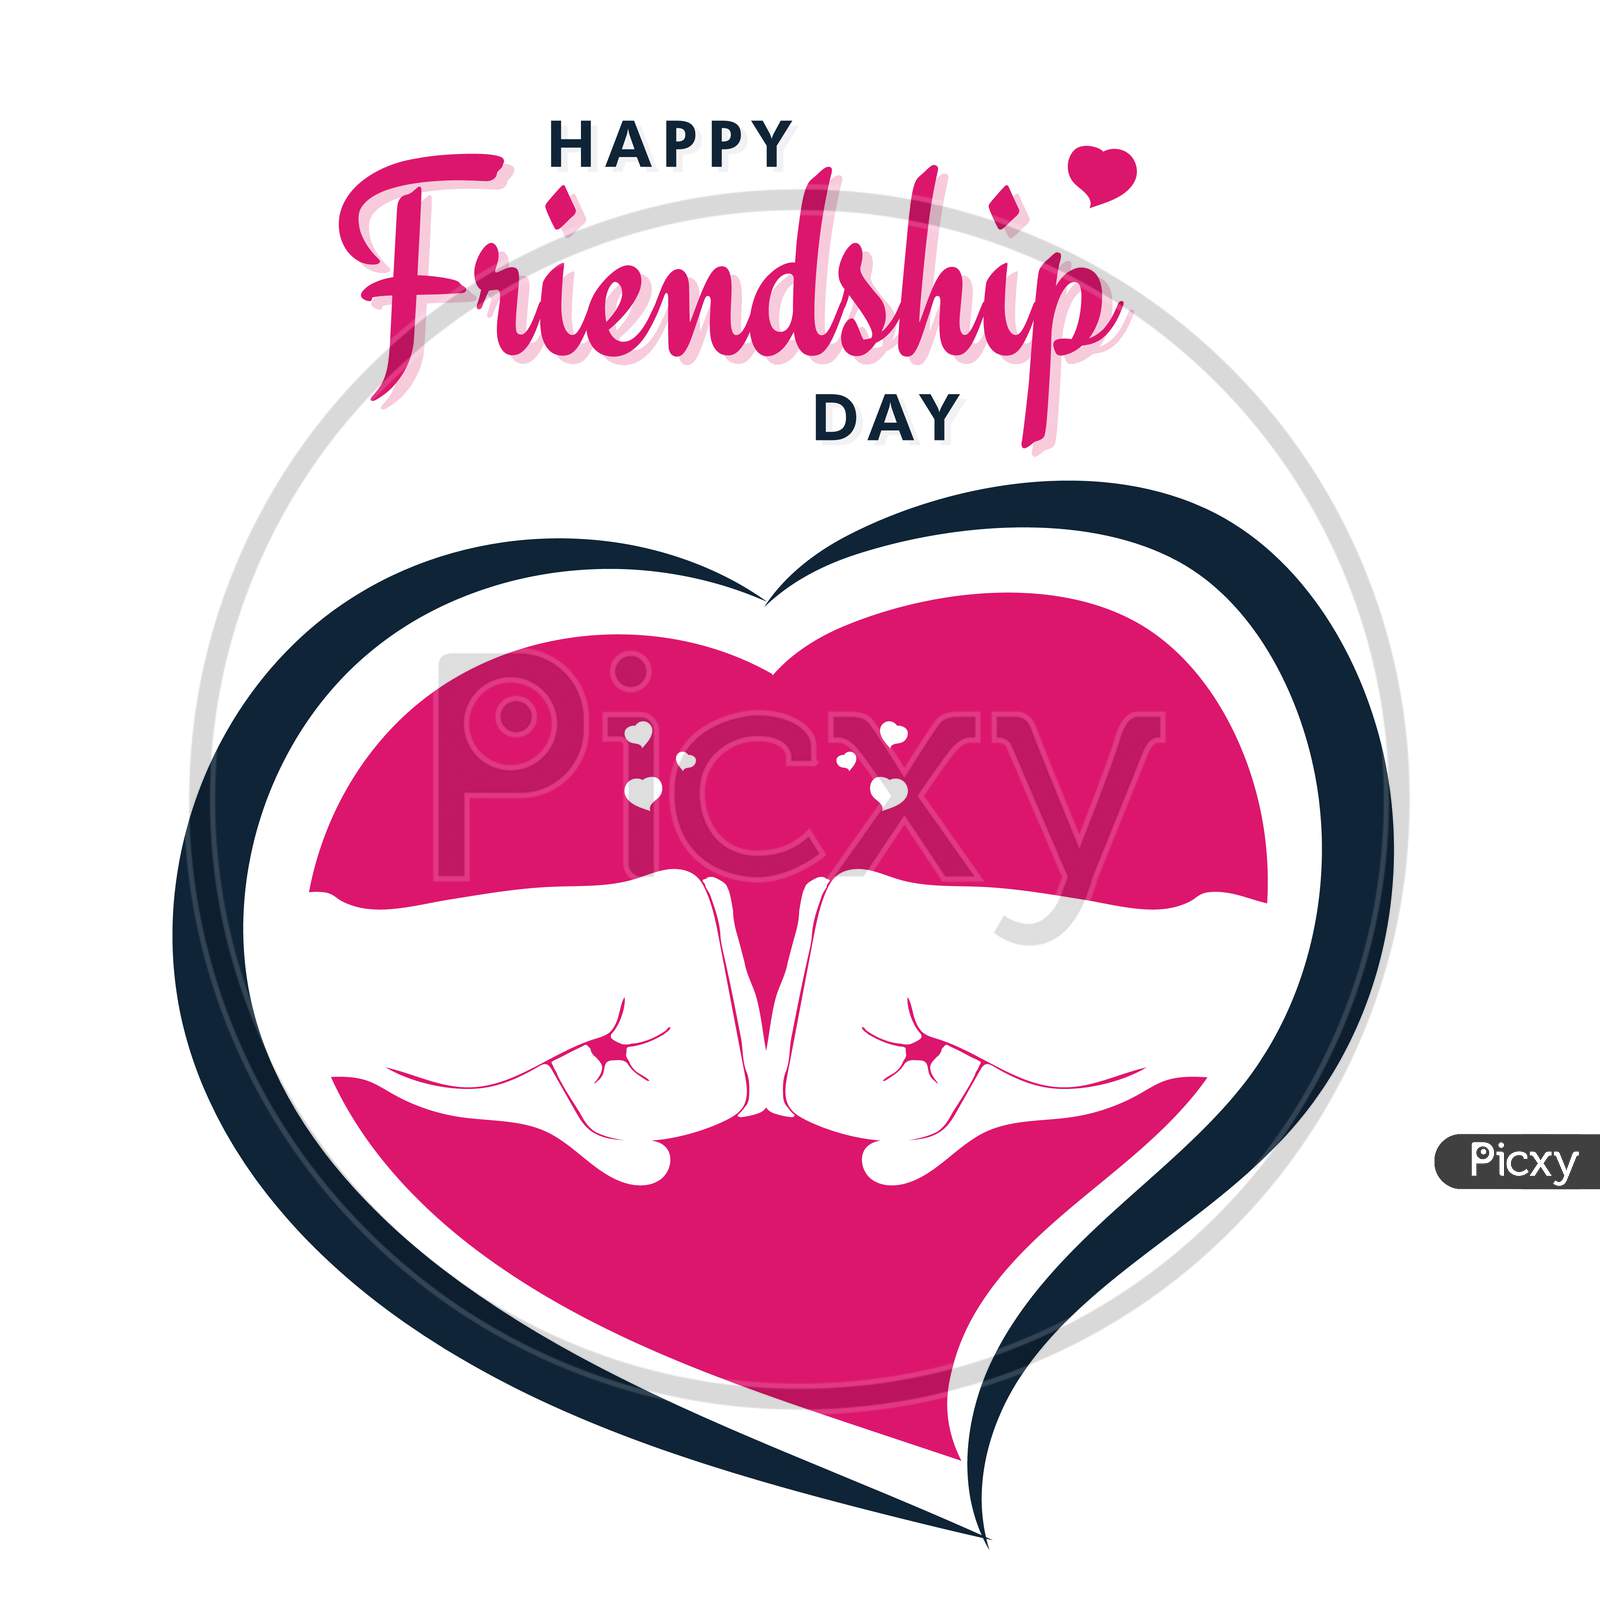 Happy Friendship Day, Fist Bump With Friends Illustration Poster, Vector